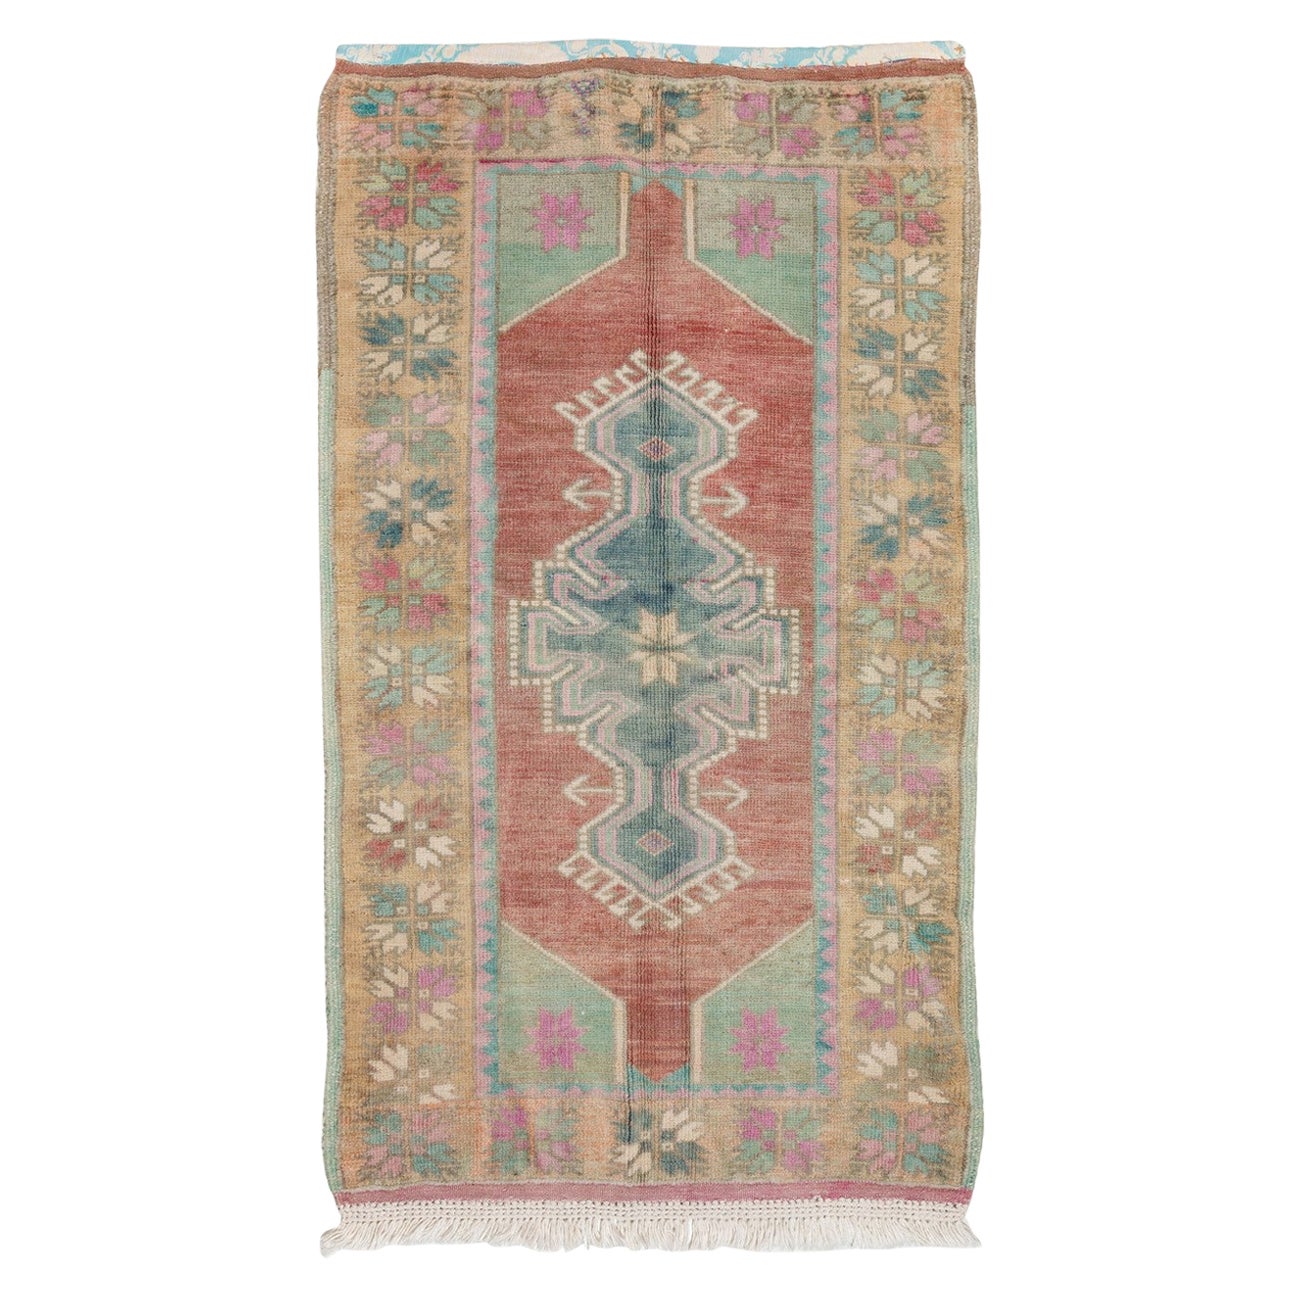 2.8x4.6 Ft Vintage Turkish Scatter Rug in Soft Red, Green, Pink & Purple Colors For Sale